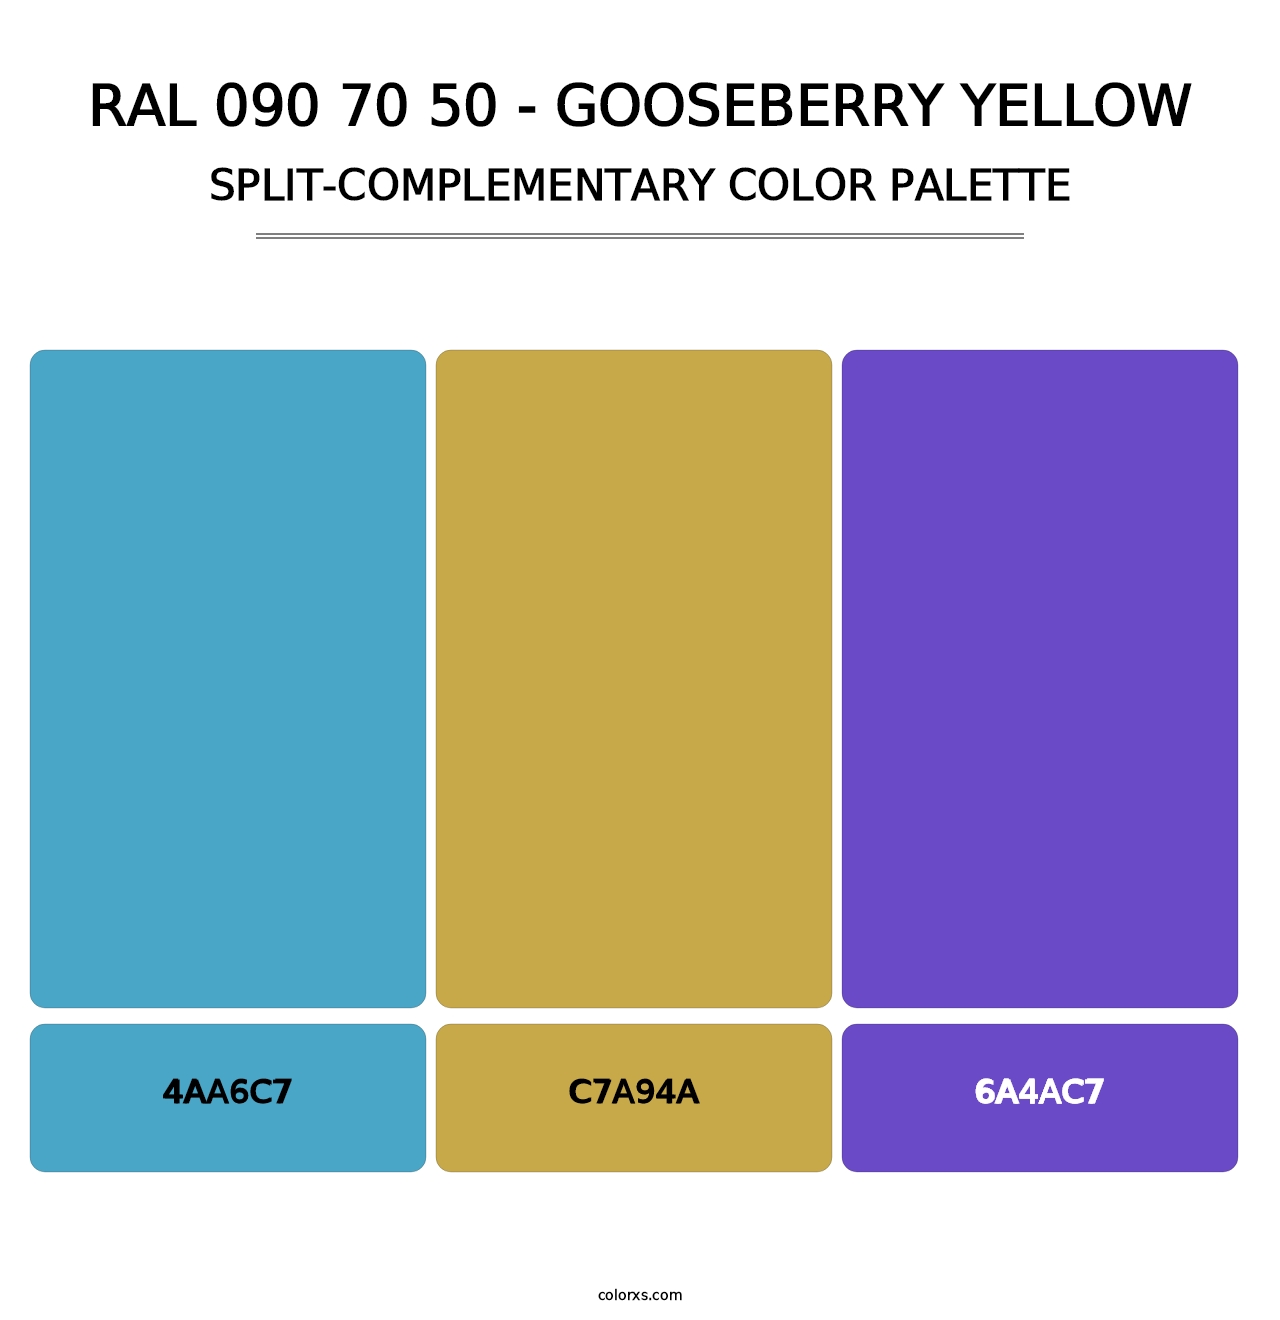 RAL 090 70 50 - Gooseberry Yellow - Split-Complementary Color Palette